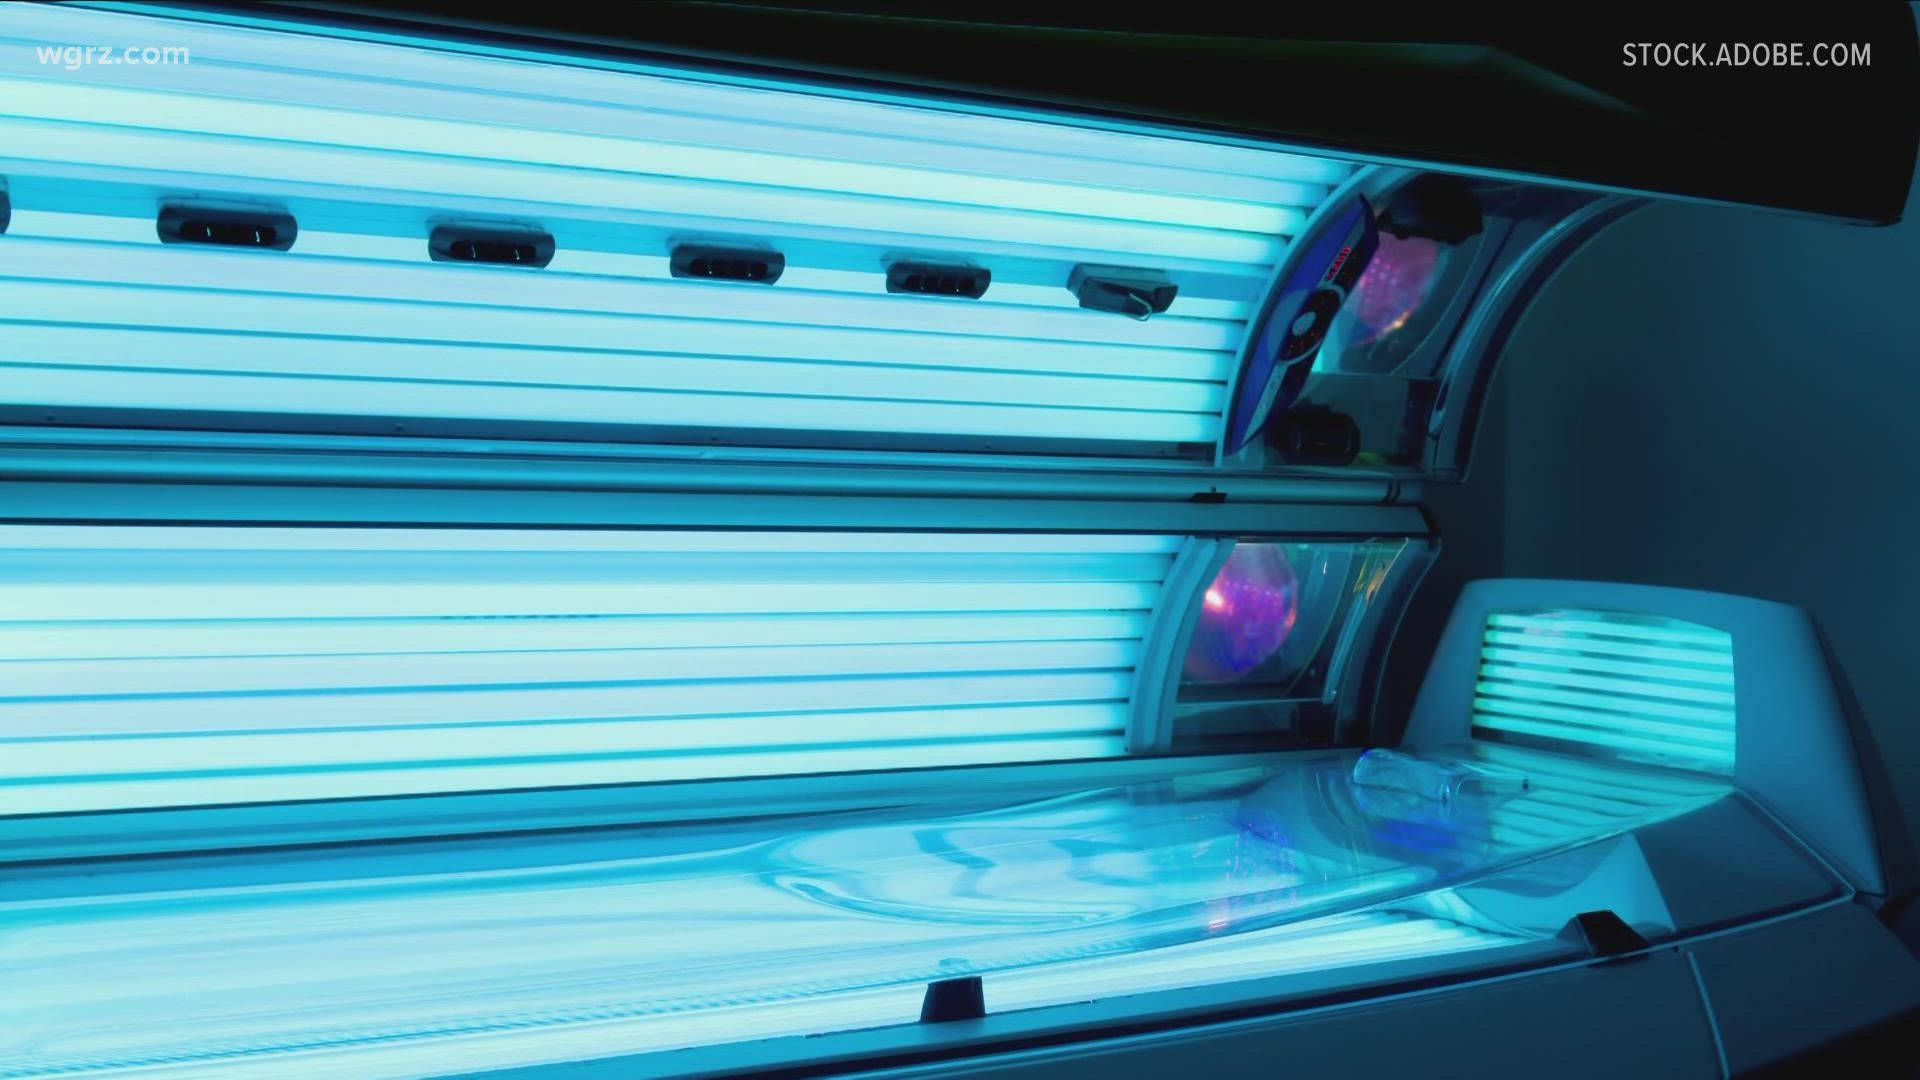 Two democratic New York lawmakers want to raise the minimum age to use tanning beds.